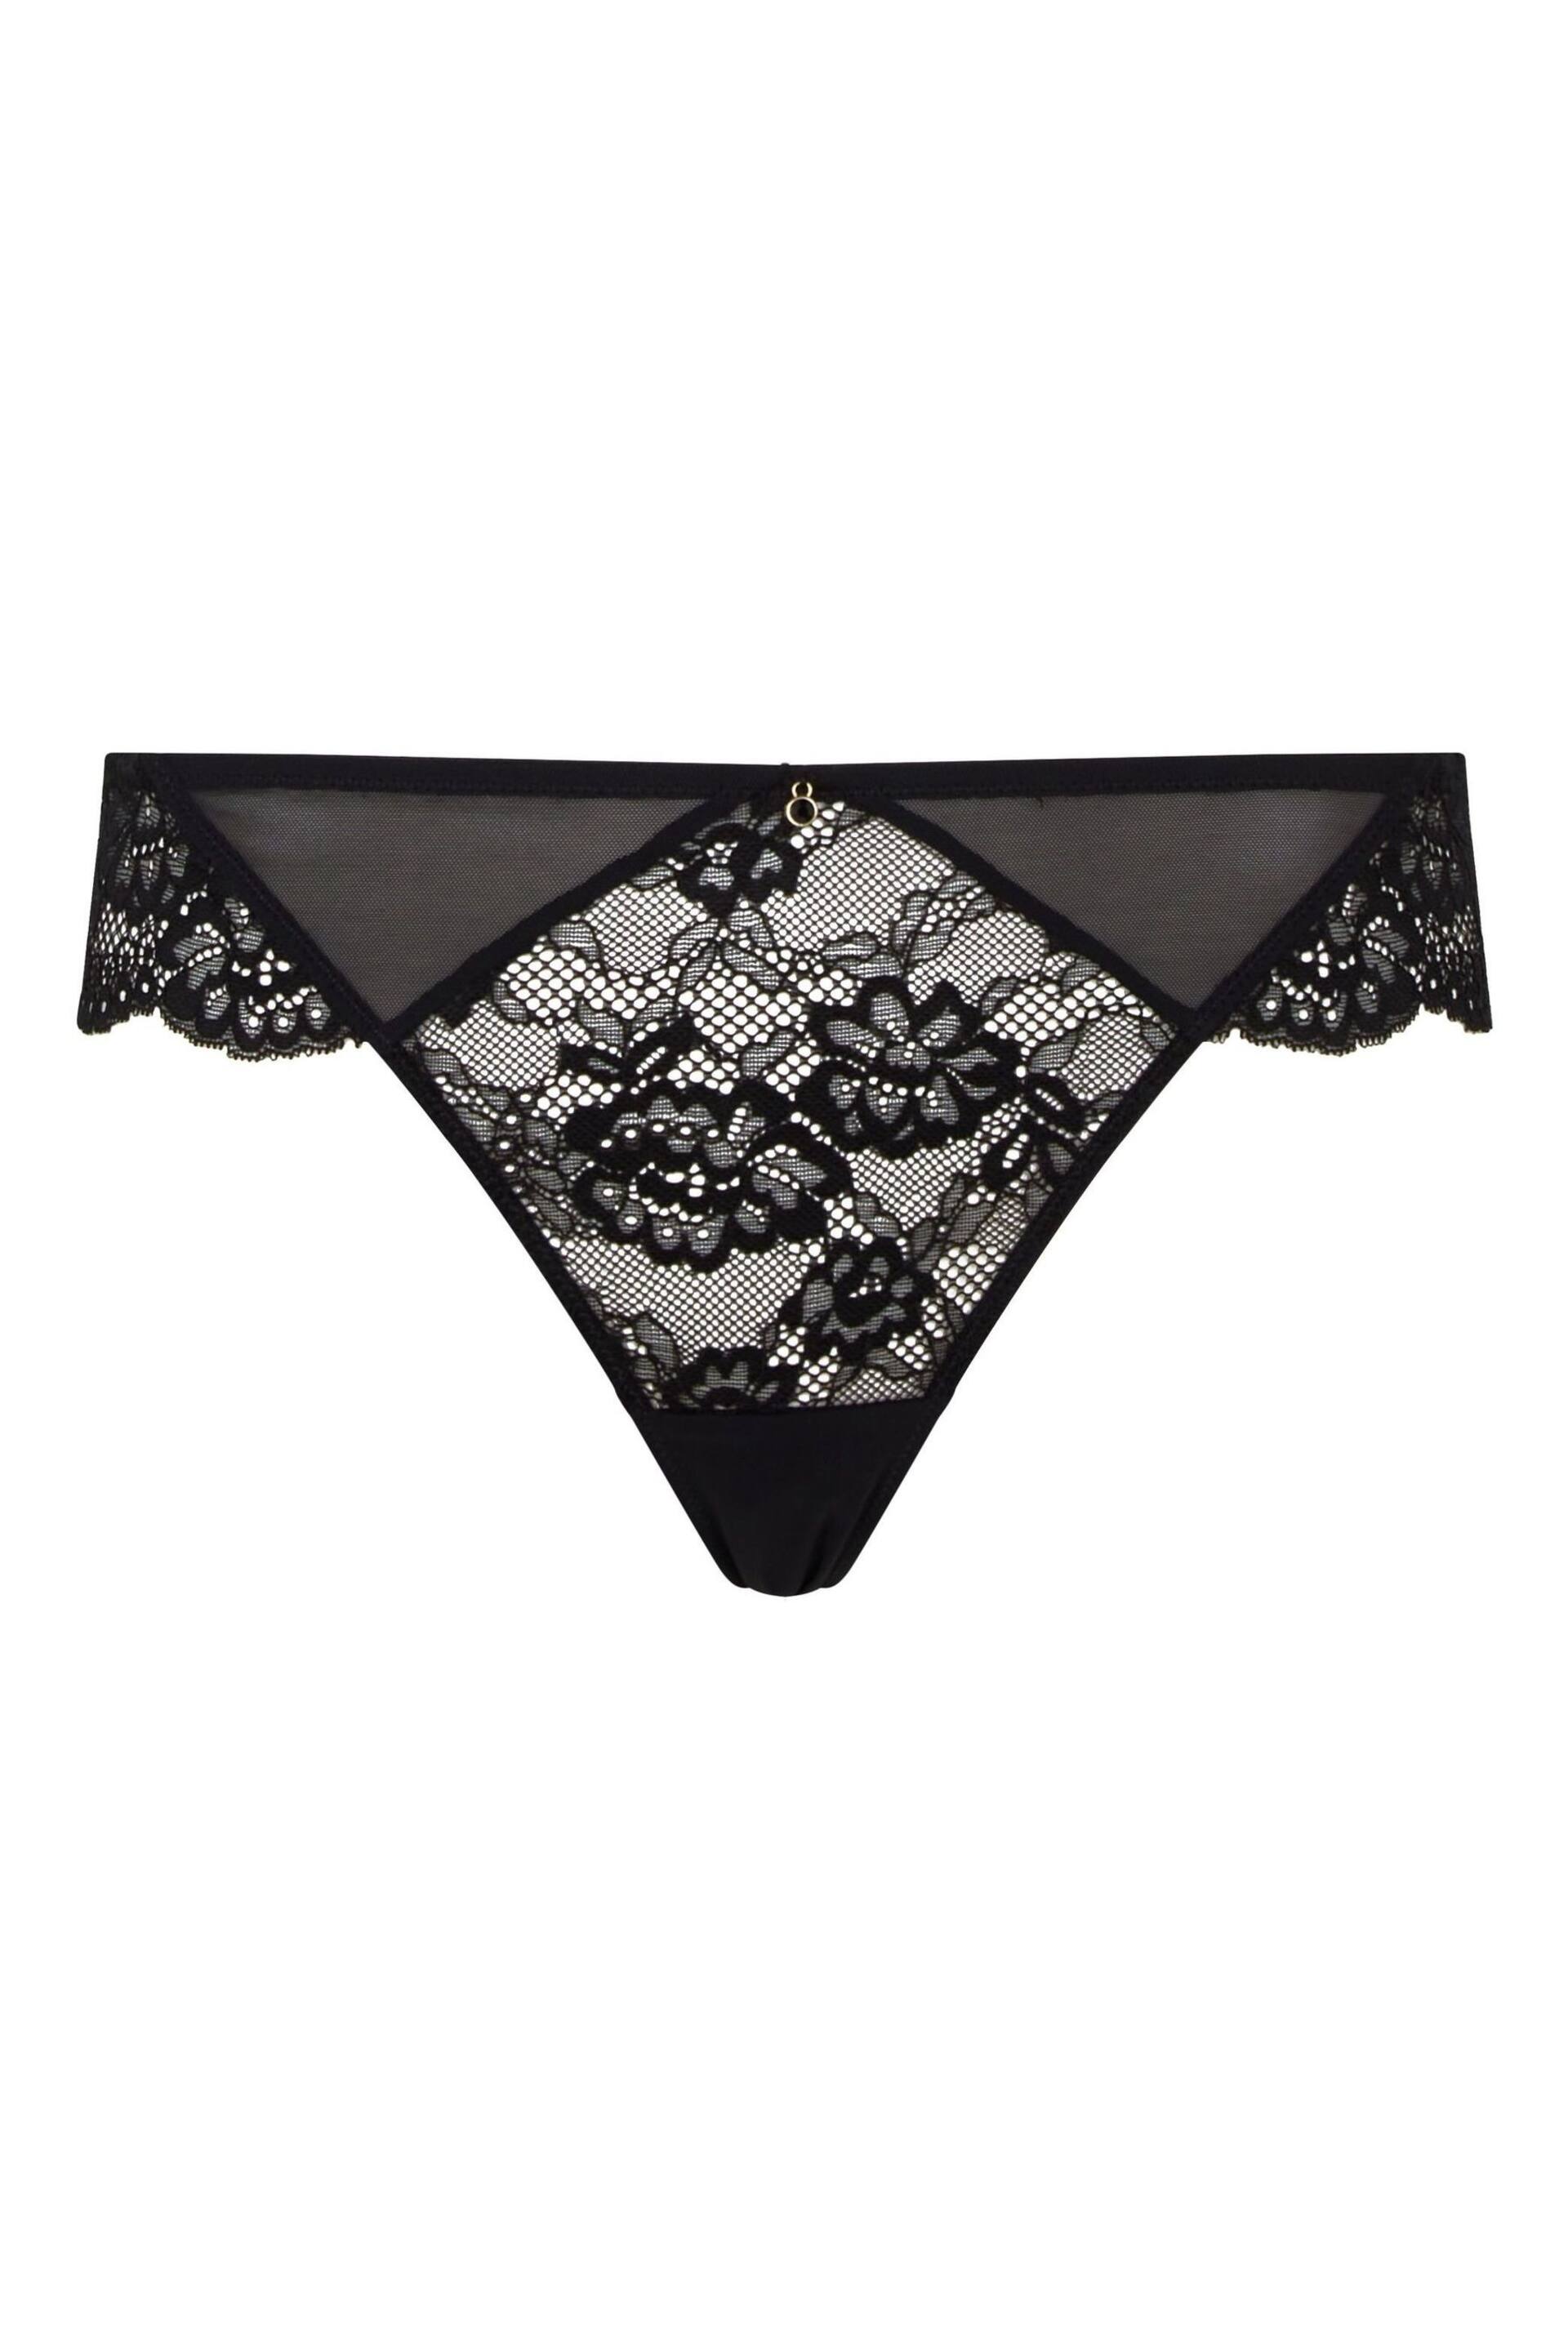 Ann Summers Black Sexy Lace Planet String Knickers - Image 5 of 5